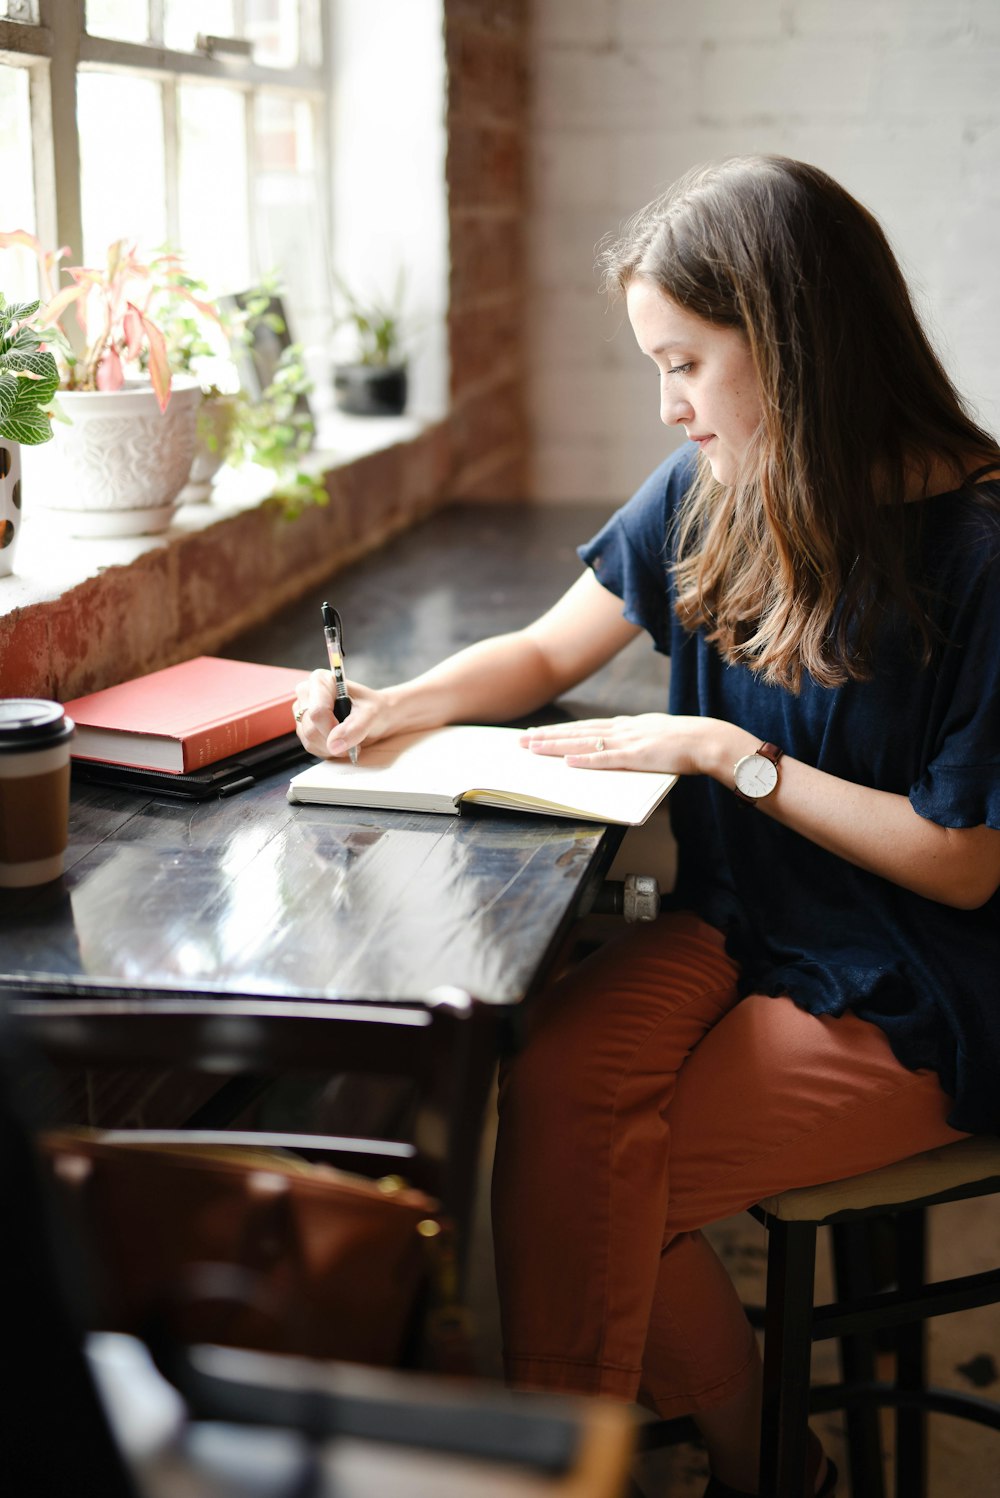 woman sitting in front of black table writing on white book near window  photo – Free Writing Image on Unsplash